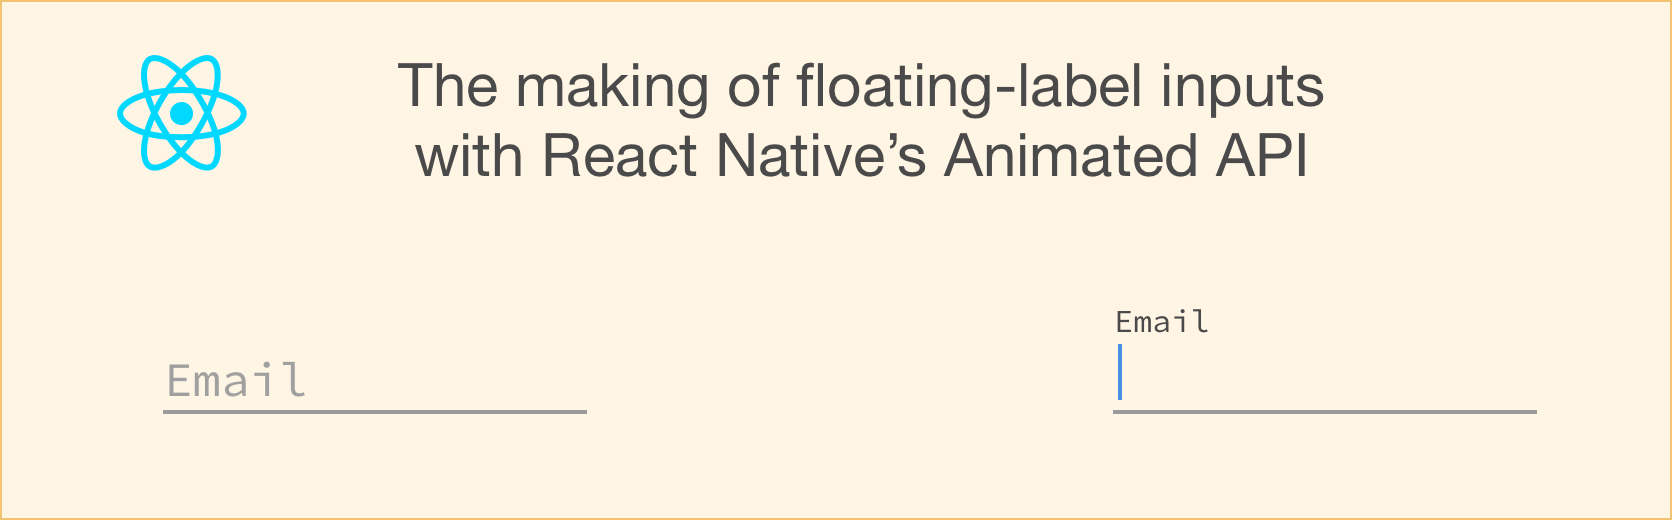 The making of a floating-label input with React Native's Animated API -  Gosha Arinich